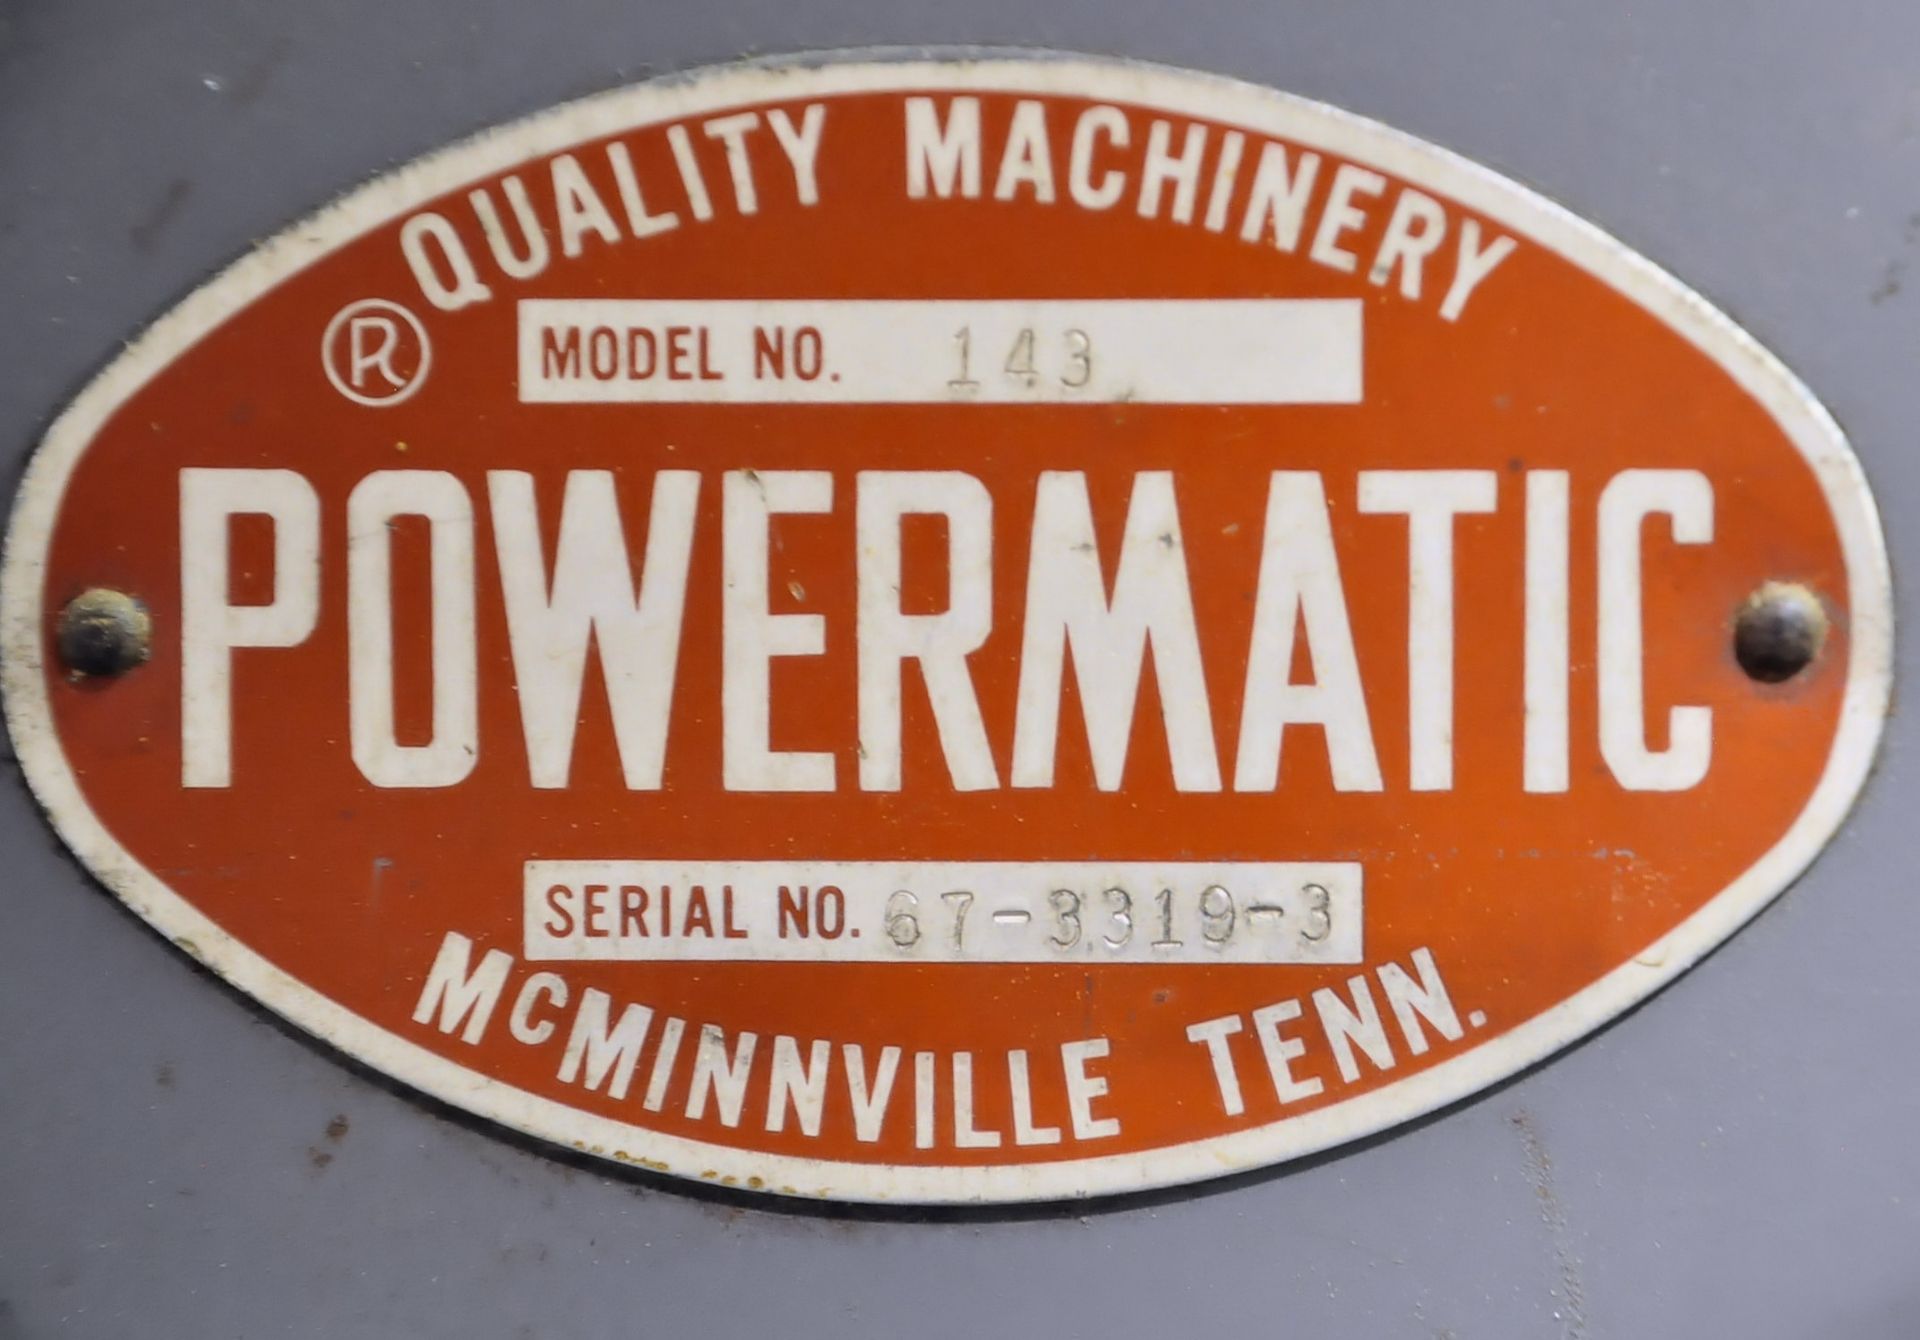 Powermatic Model 143, 14" Vertical Contour Wood Cutting Band Saw - Image 3 of 3